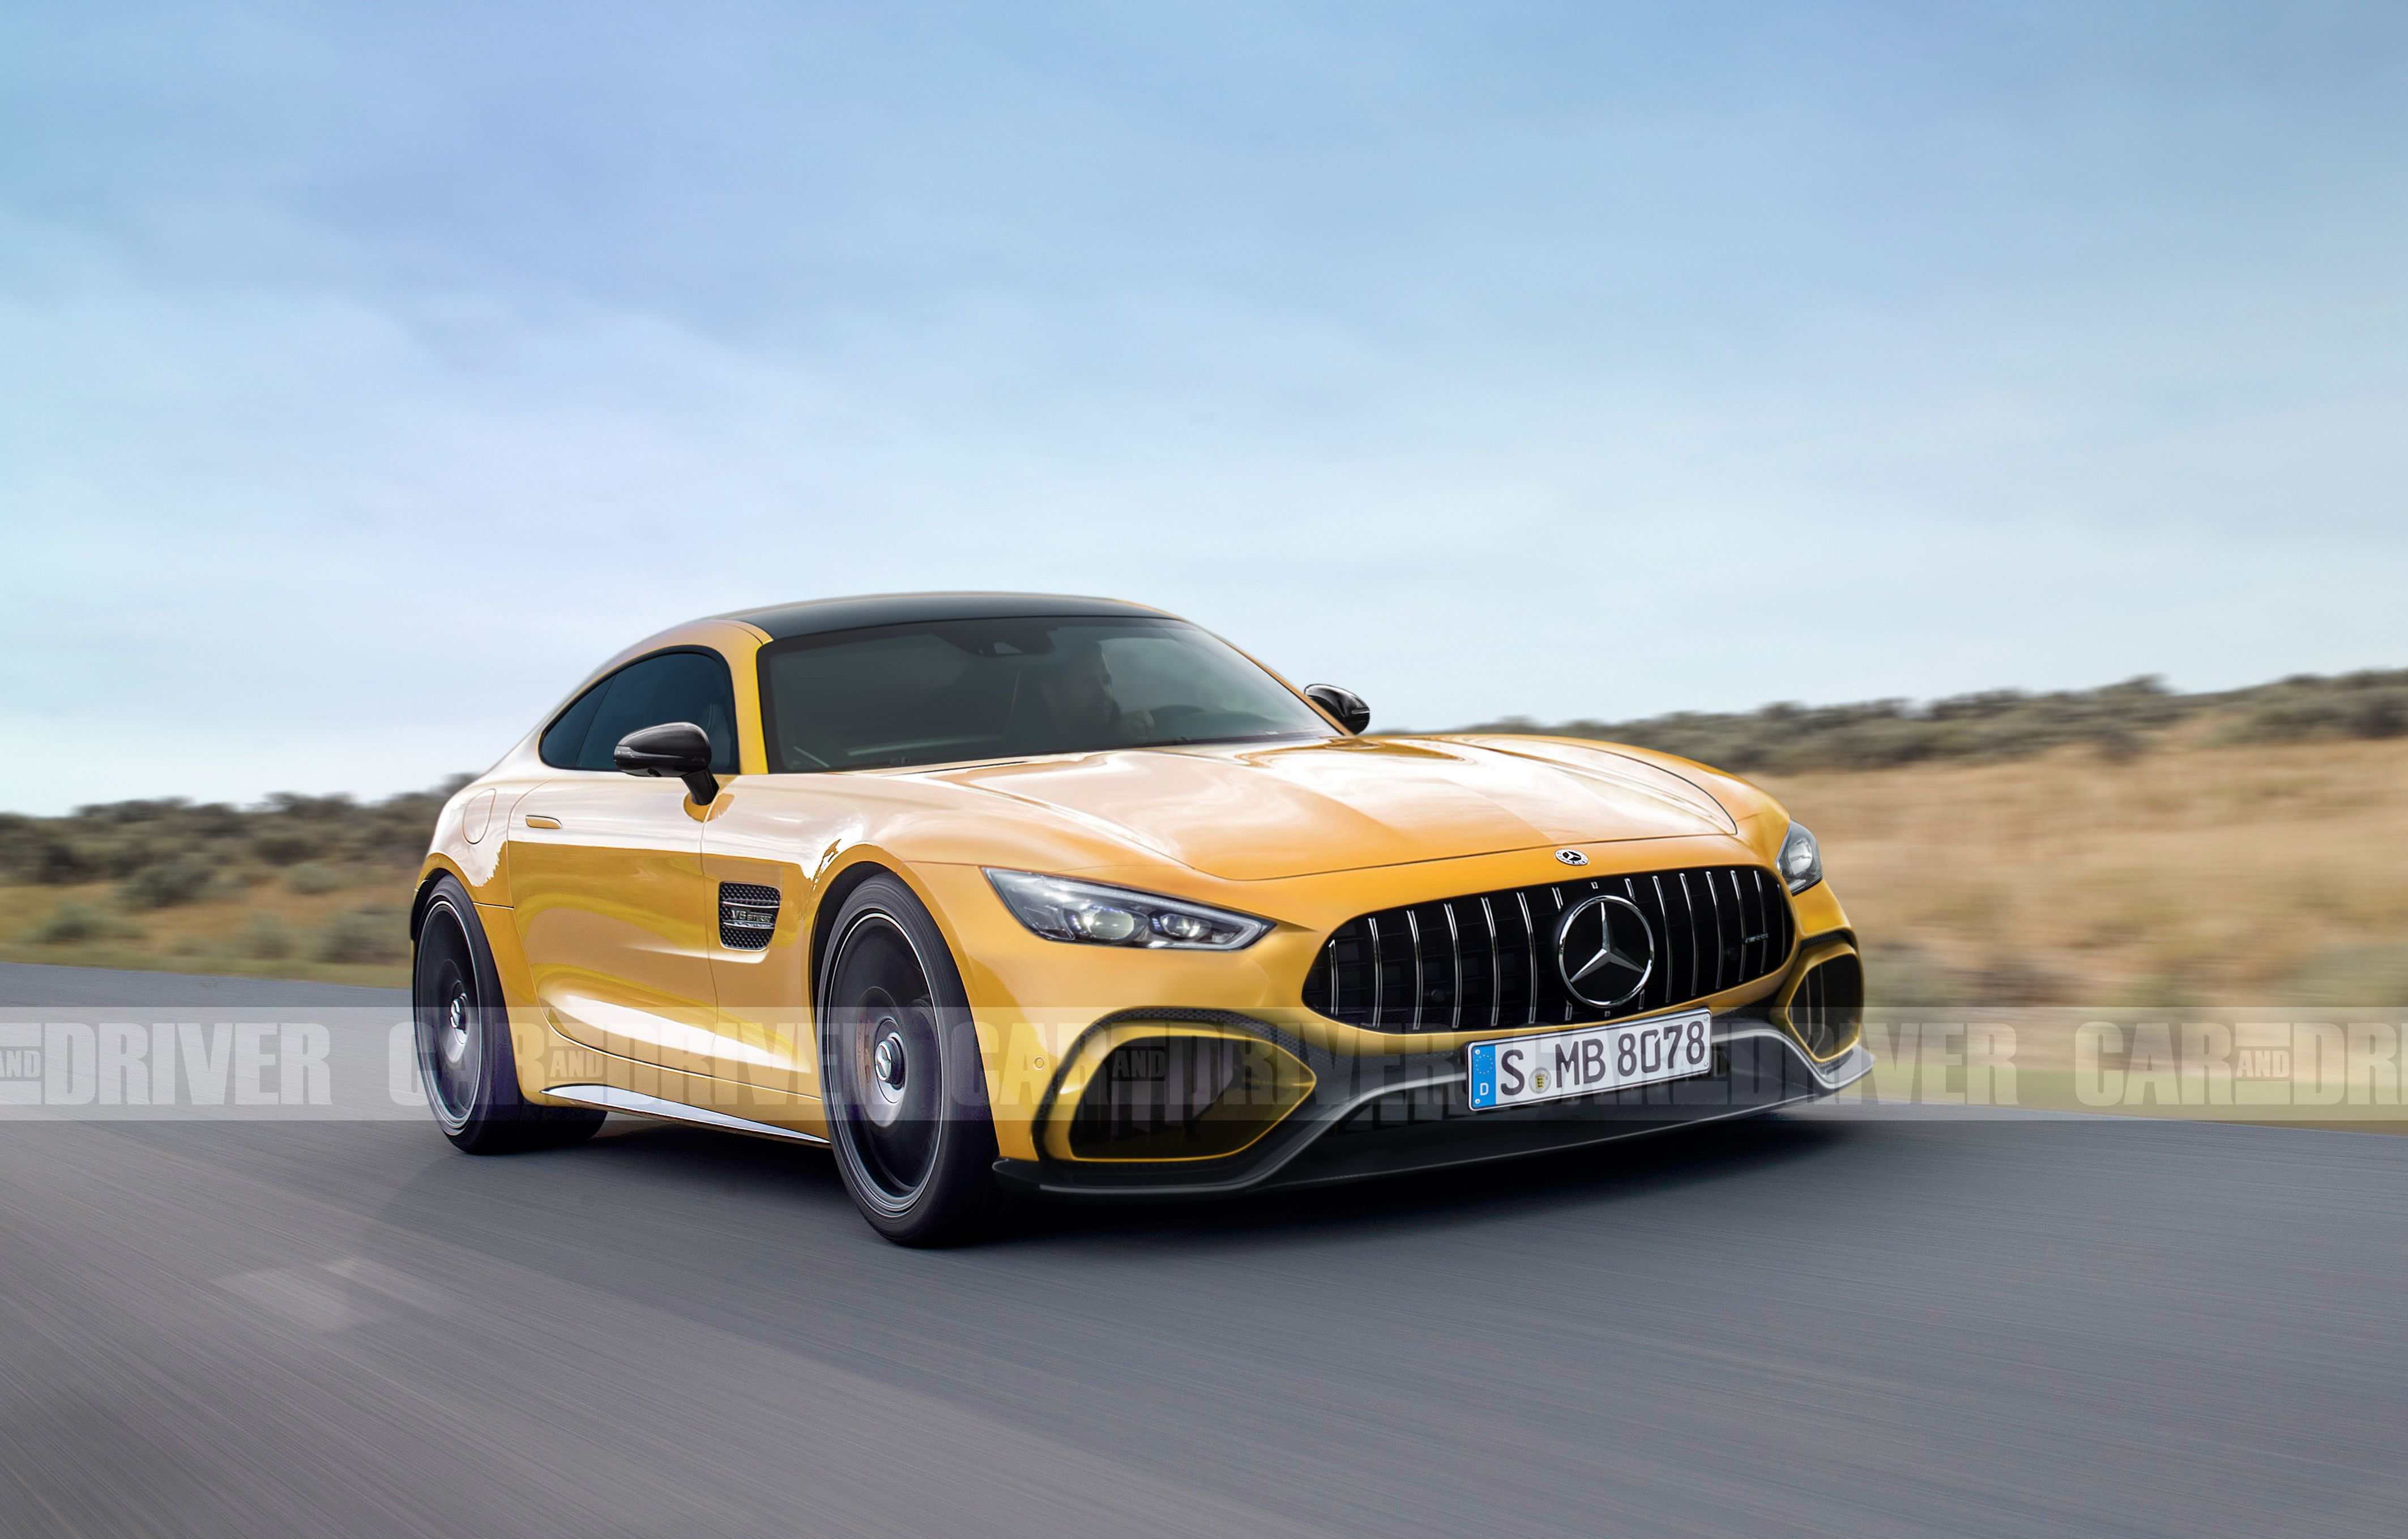 The all-new Mercedes-AMG GT Coupe